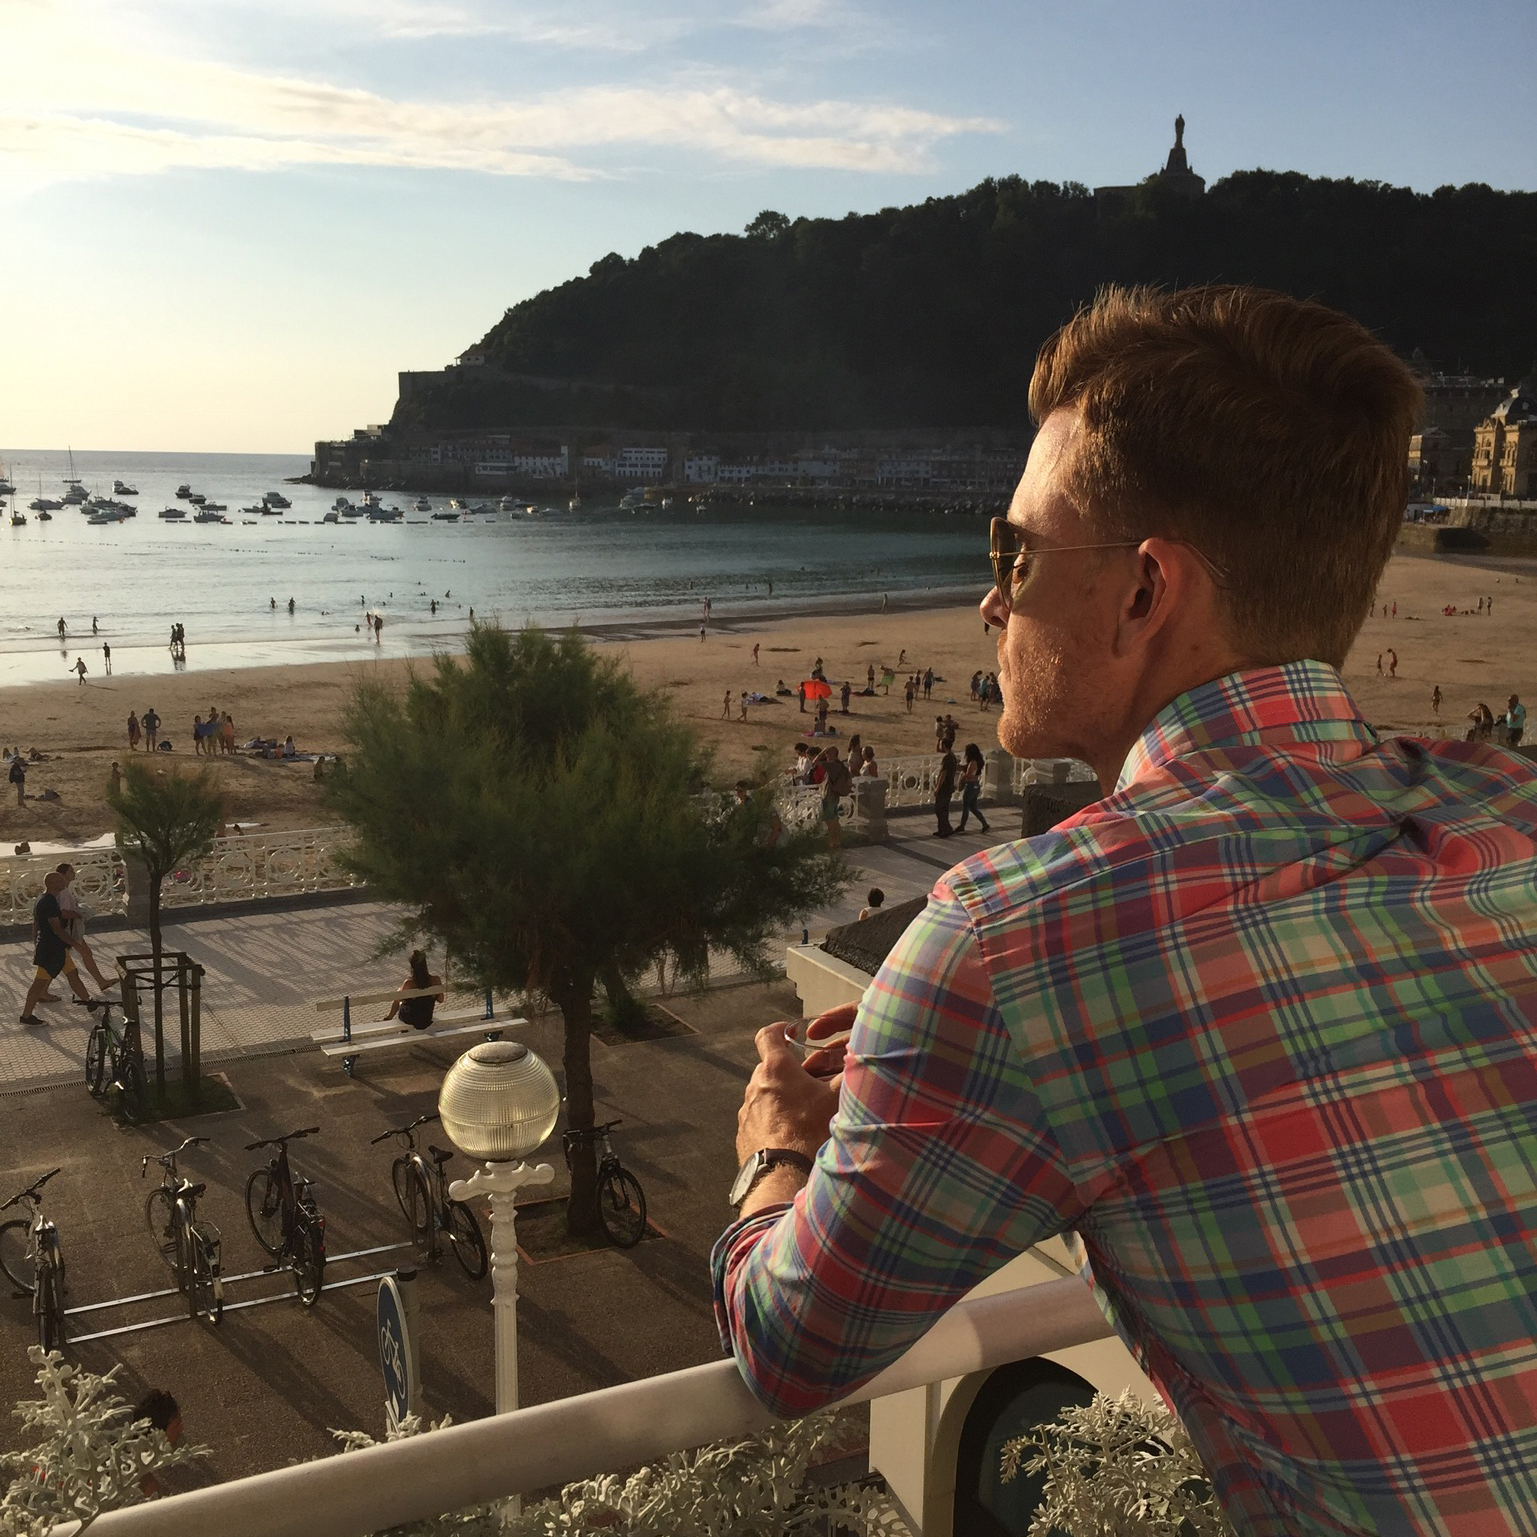 looking out over the beach in Spain